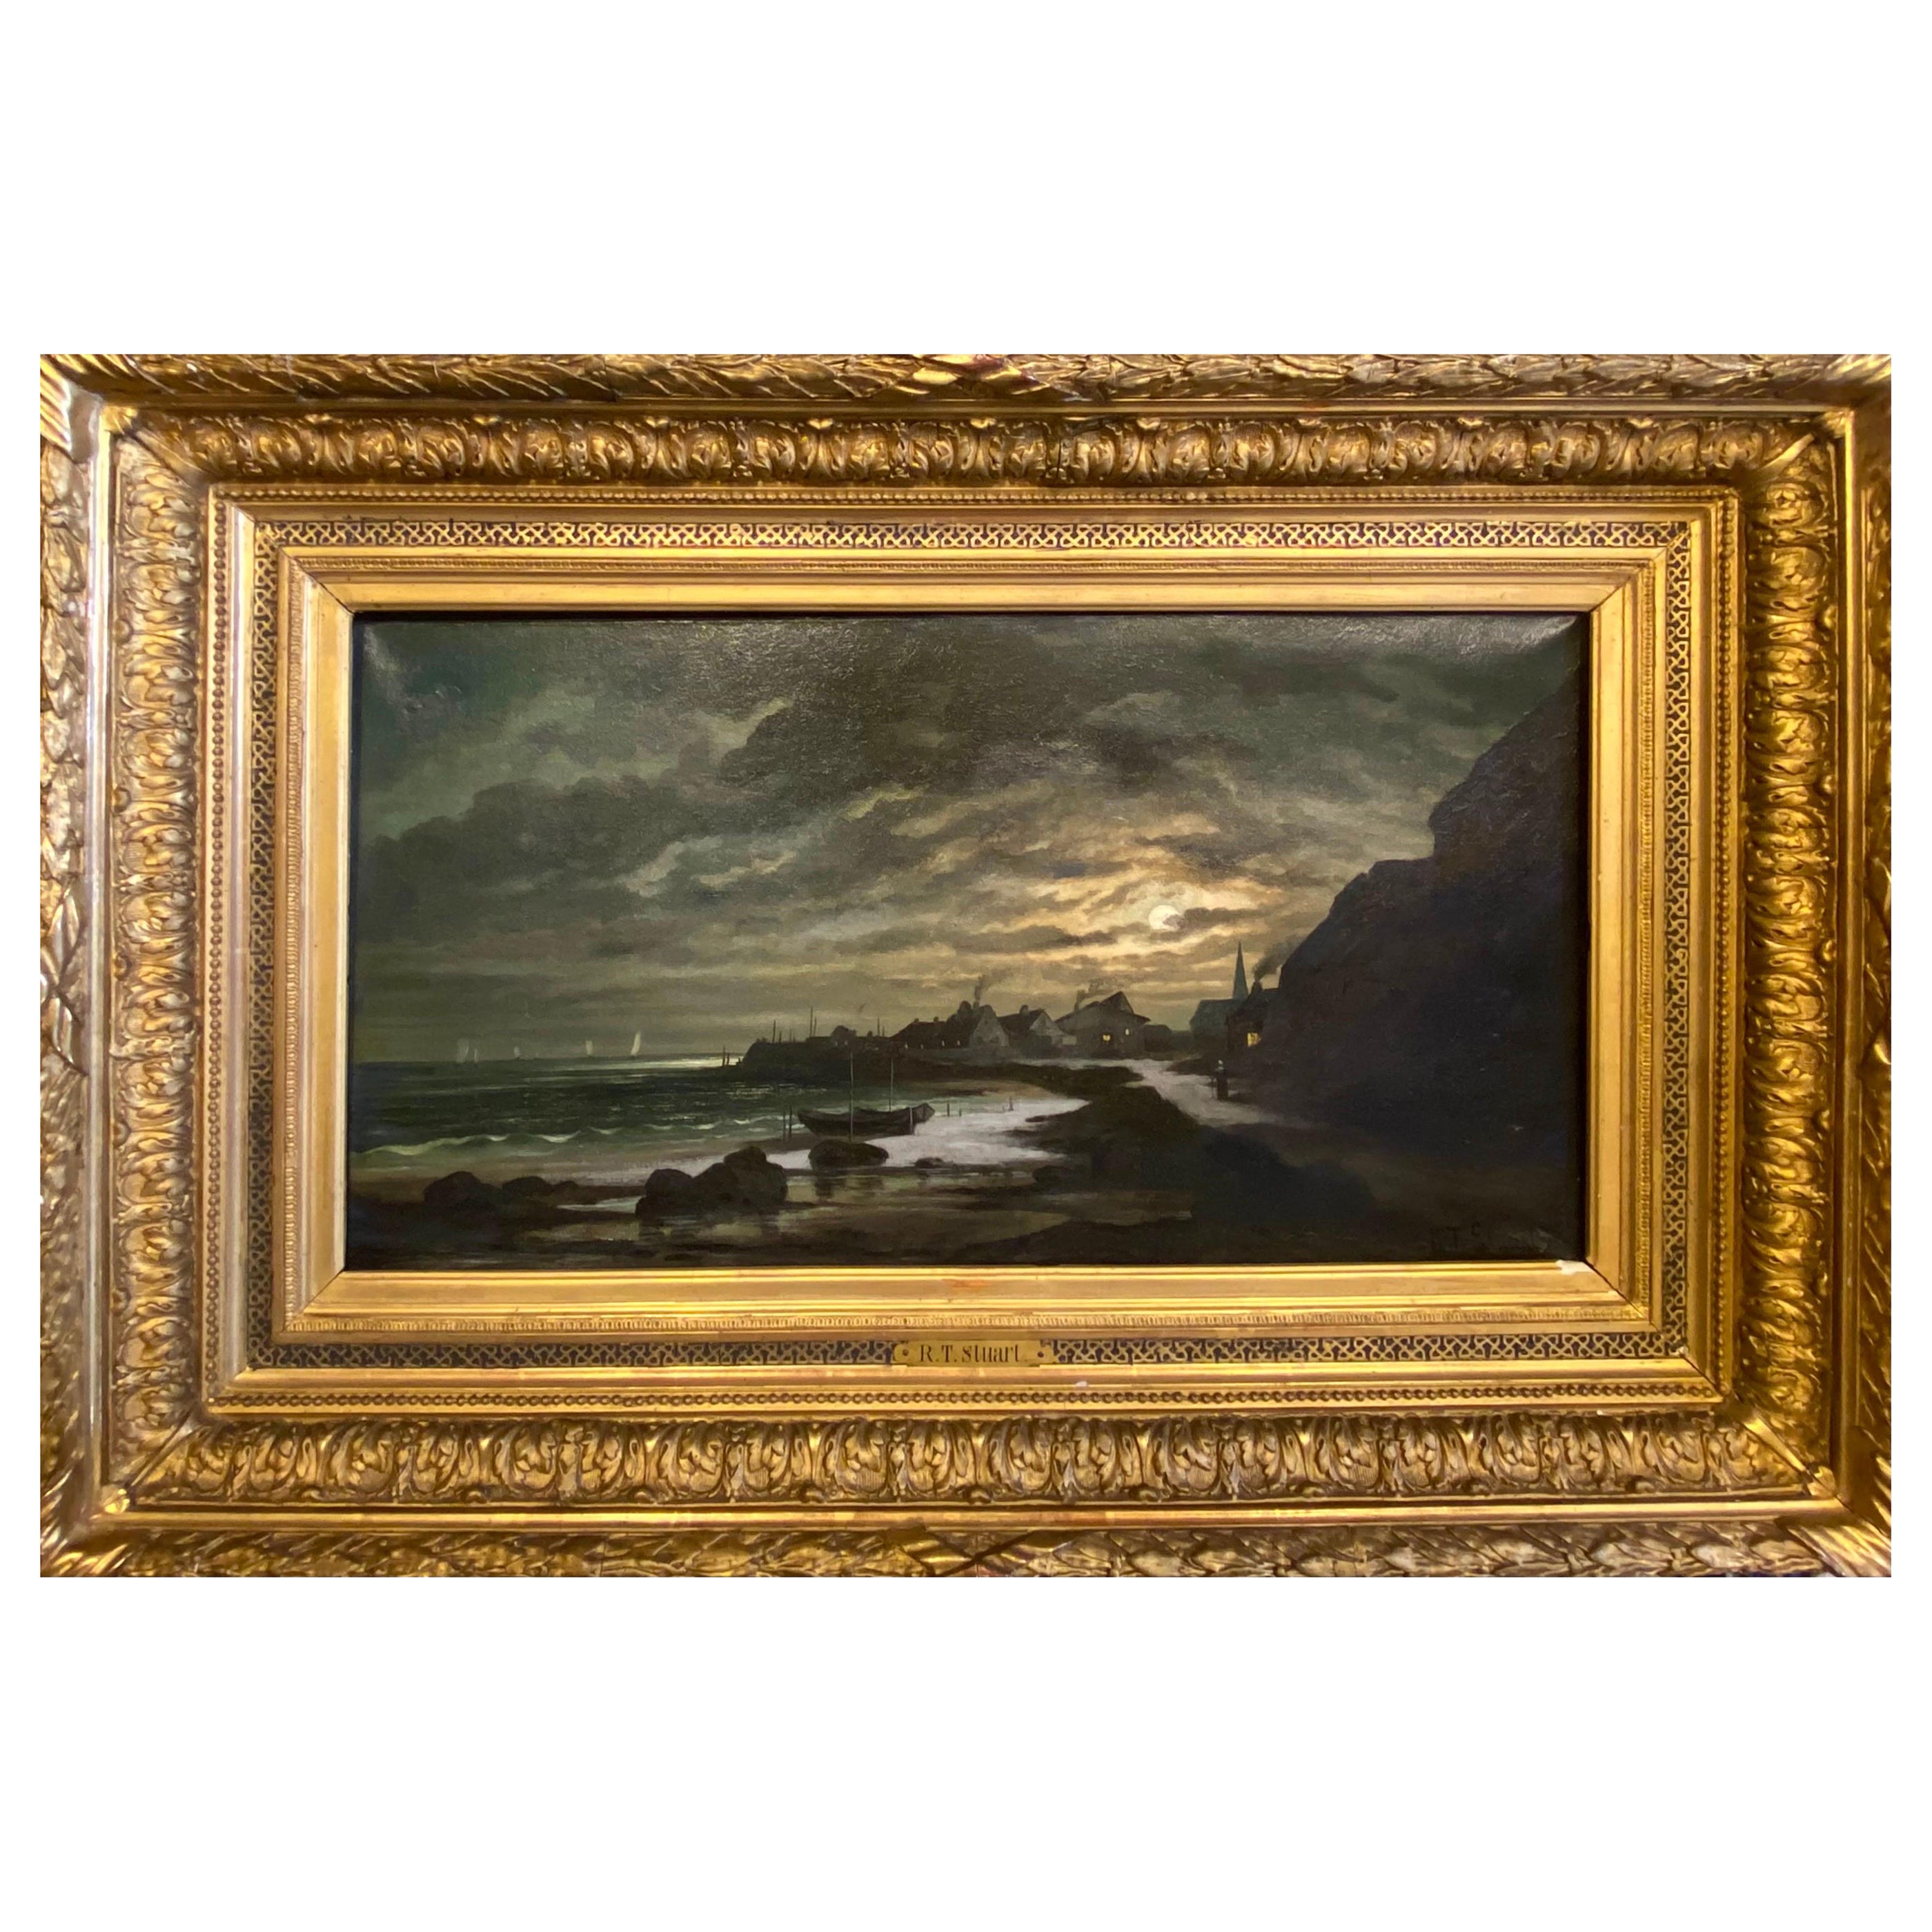 19th Century Painting "Moonlight" Oil on Canvas Signed by R. T. Stuart